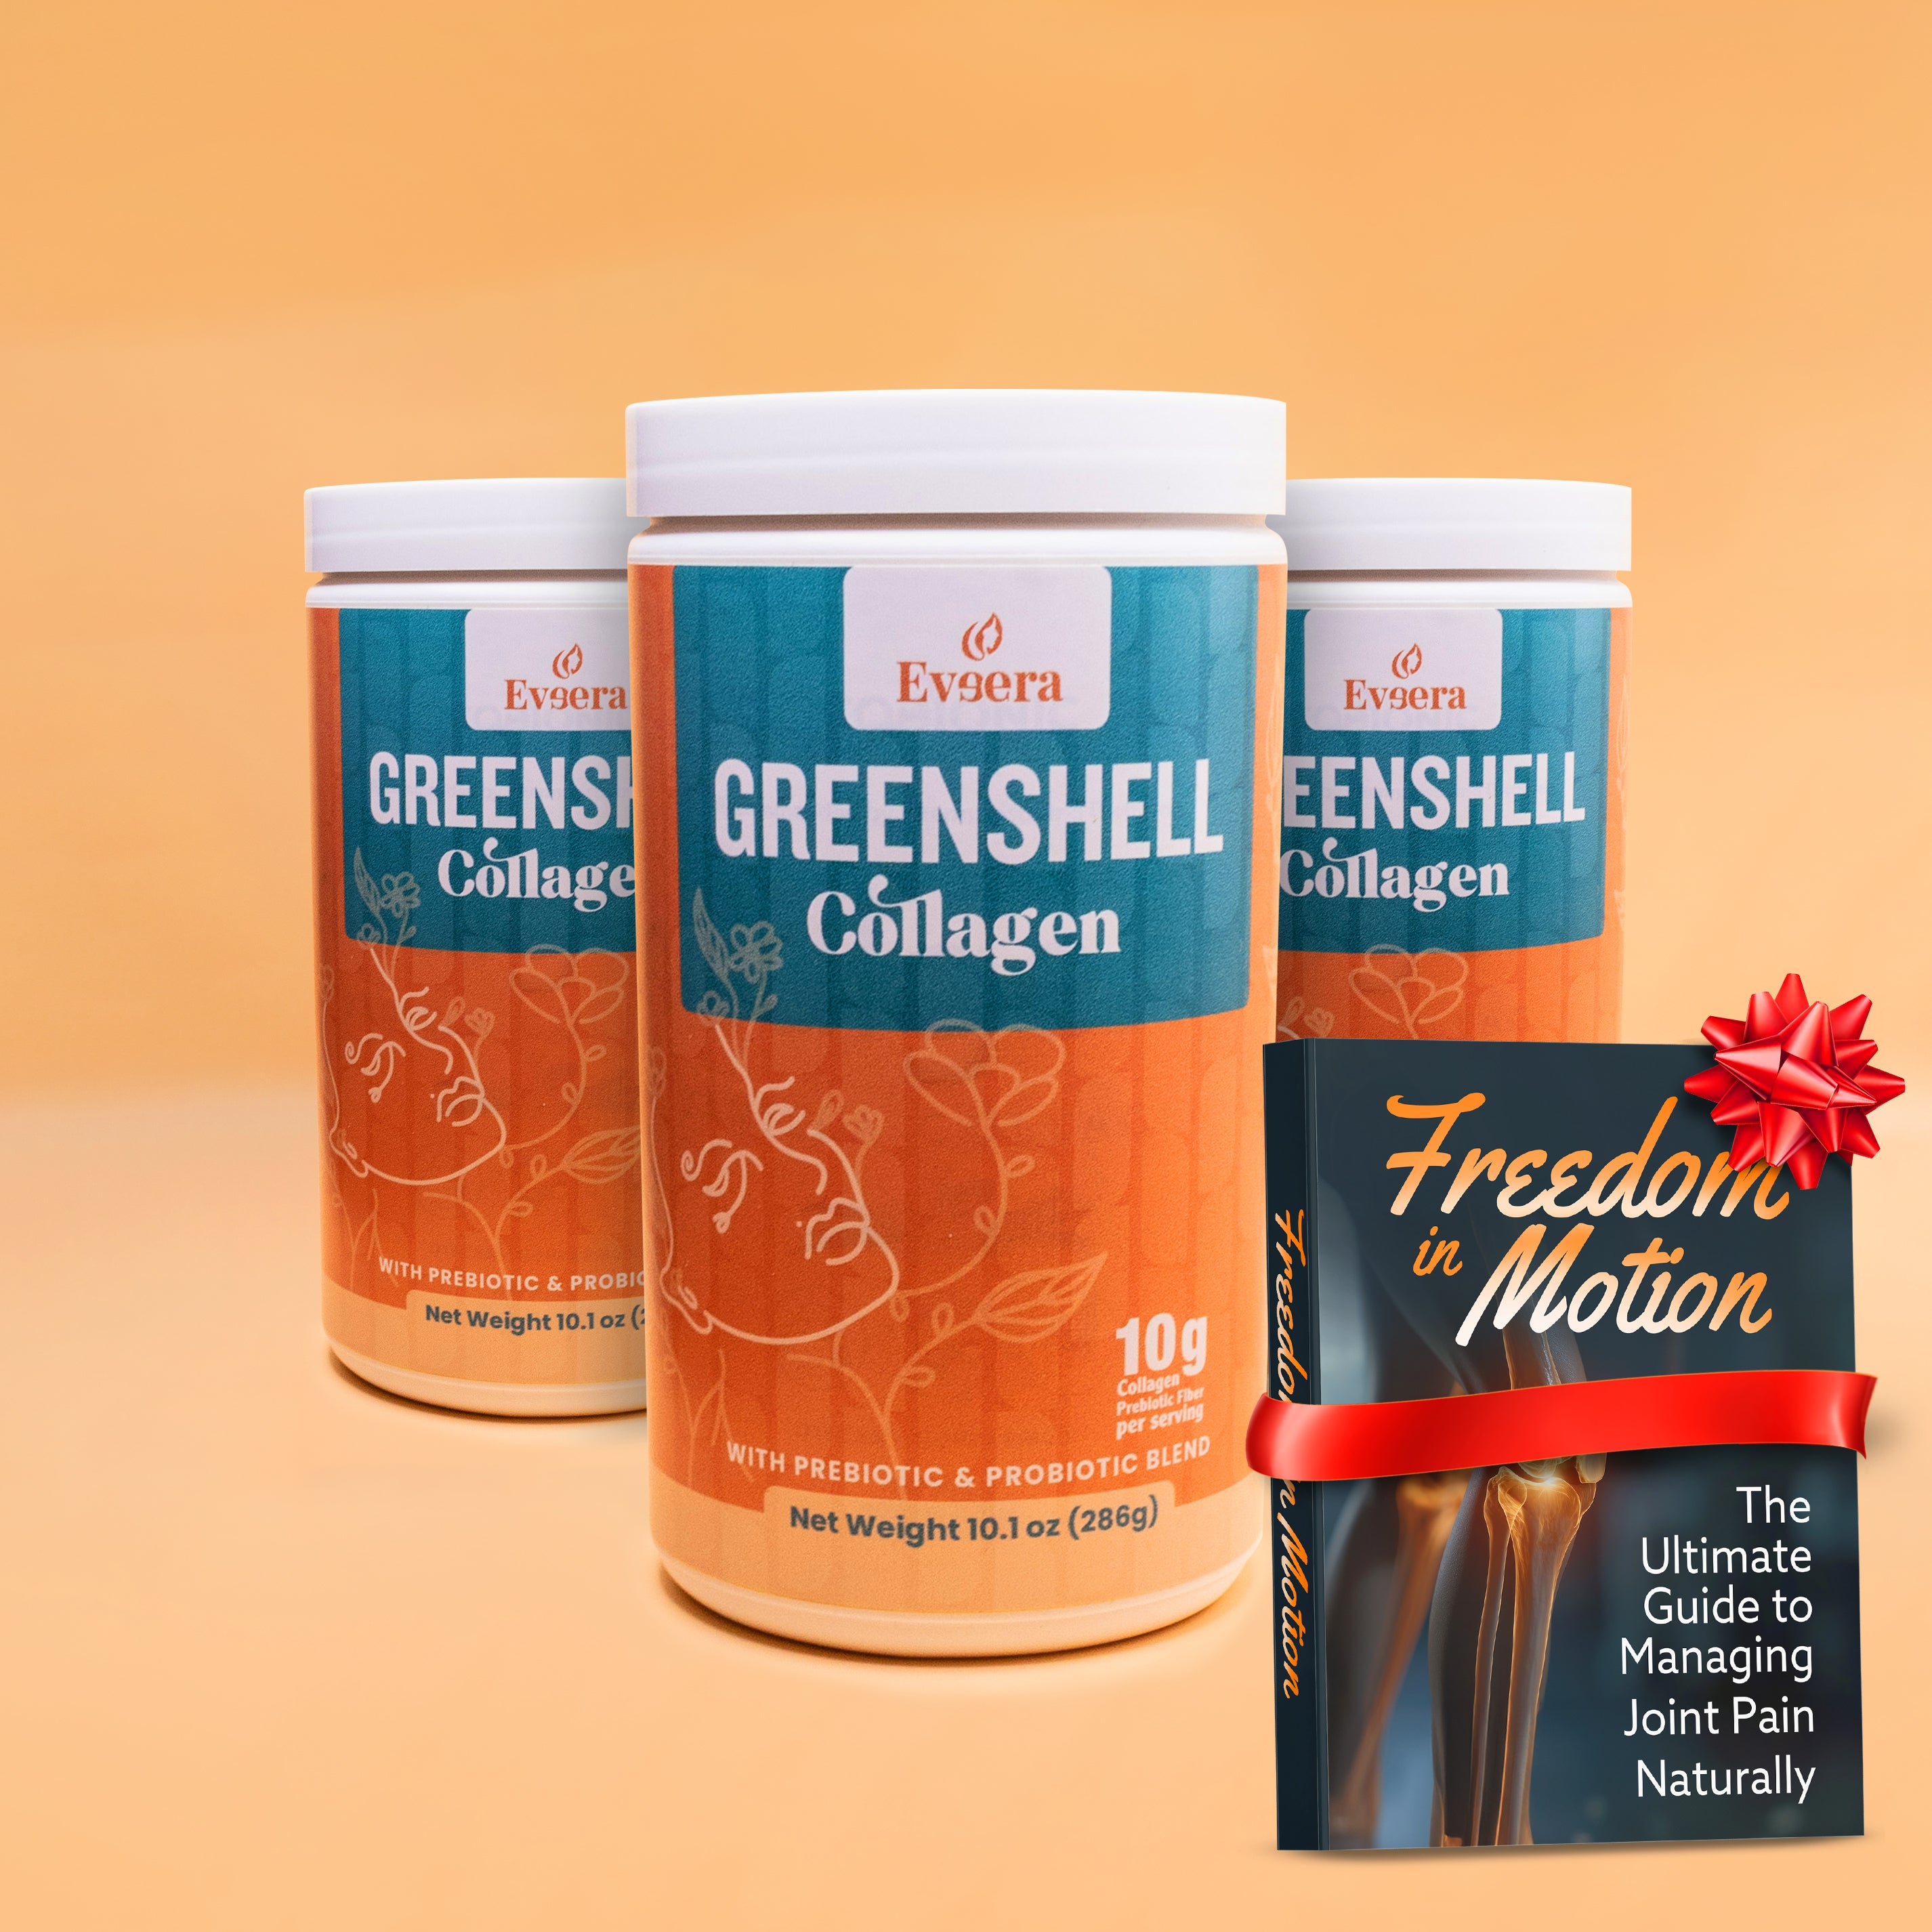 Three containers of Greenshell Collagen supplements with a promotional booklet on an orange background.